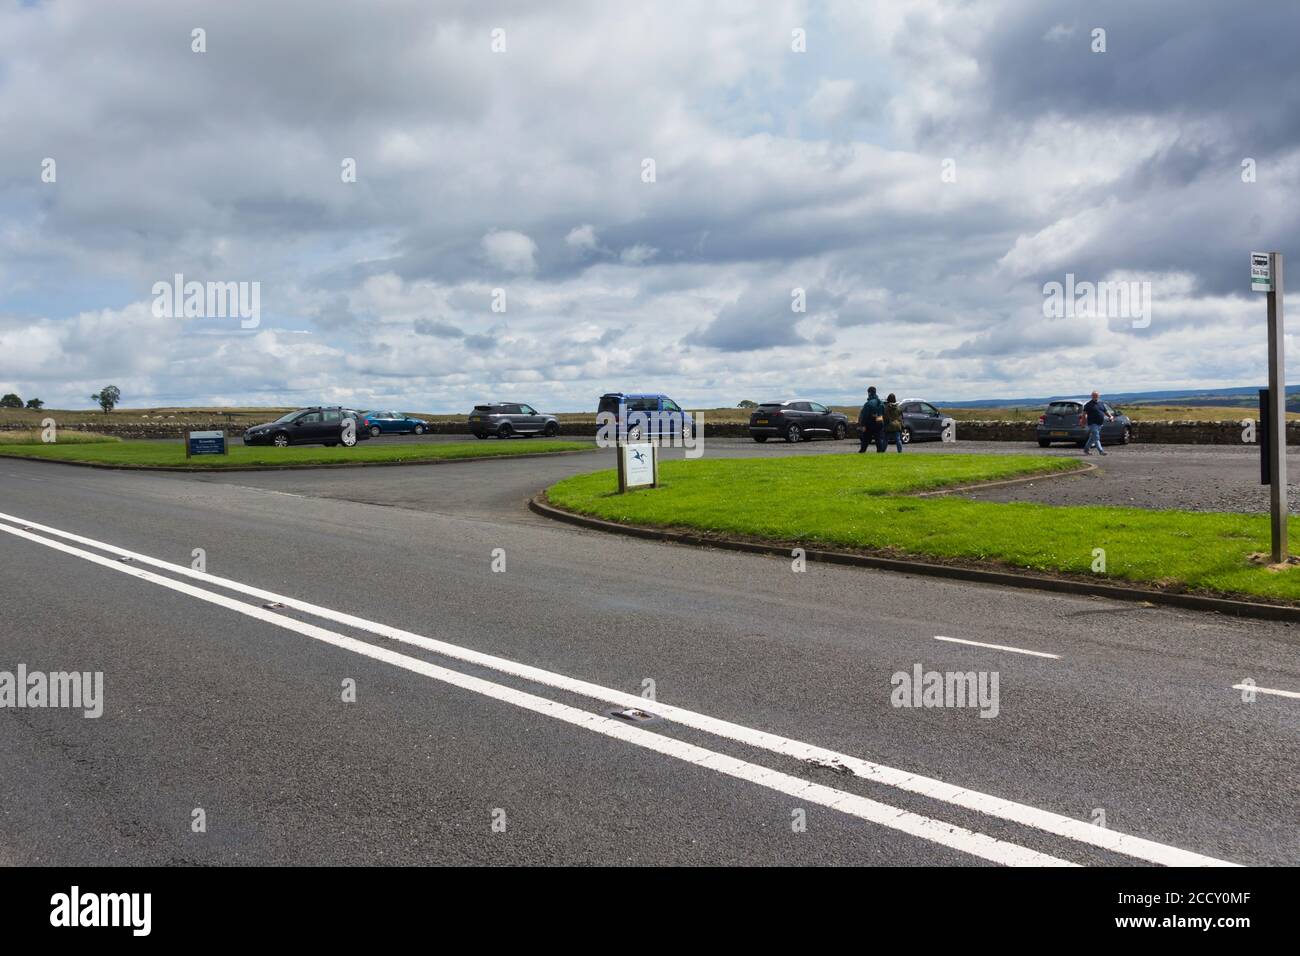 Brocolitia car park on the B6318 (known locally as 'the military road') adjacent to Hadrian's Wall and the site of the Roman Temple of Mithras. Stock Photo